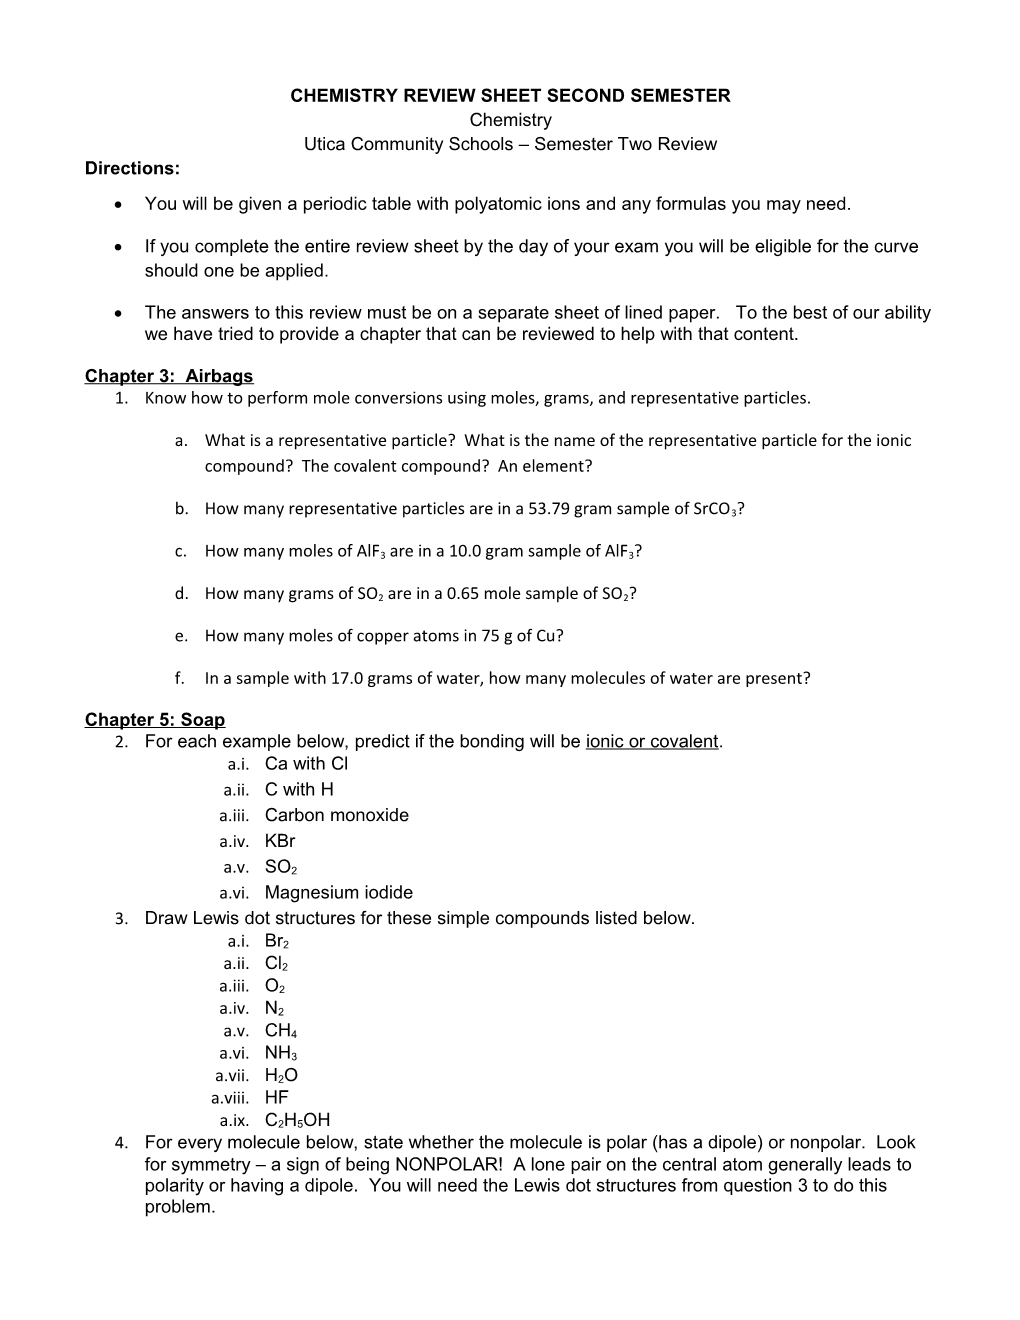 Chemistry Review Sheet Second Semester